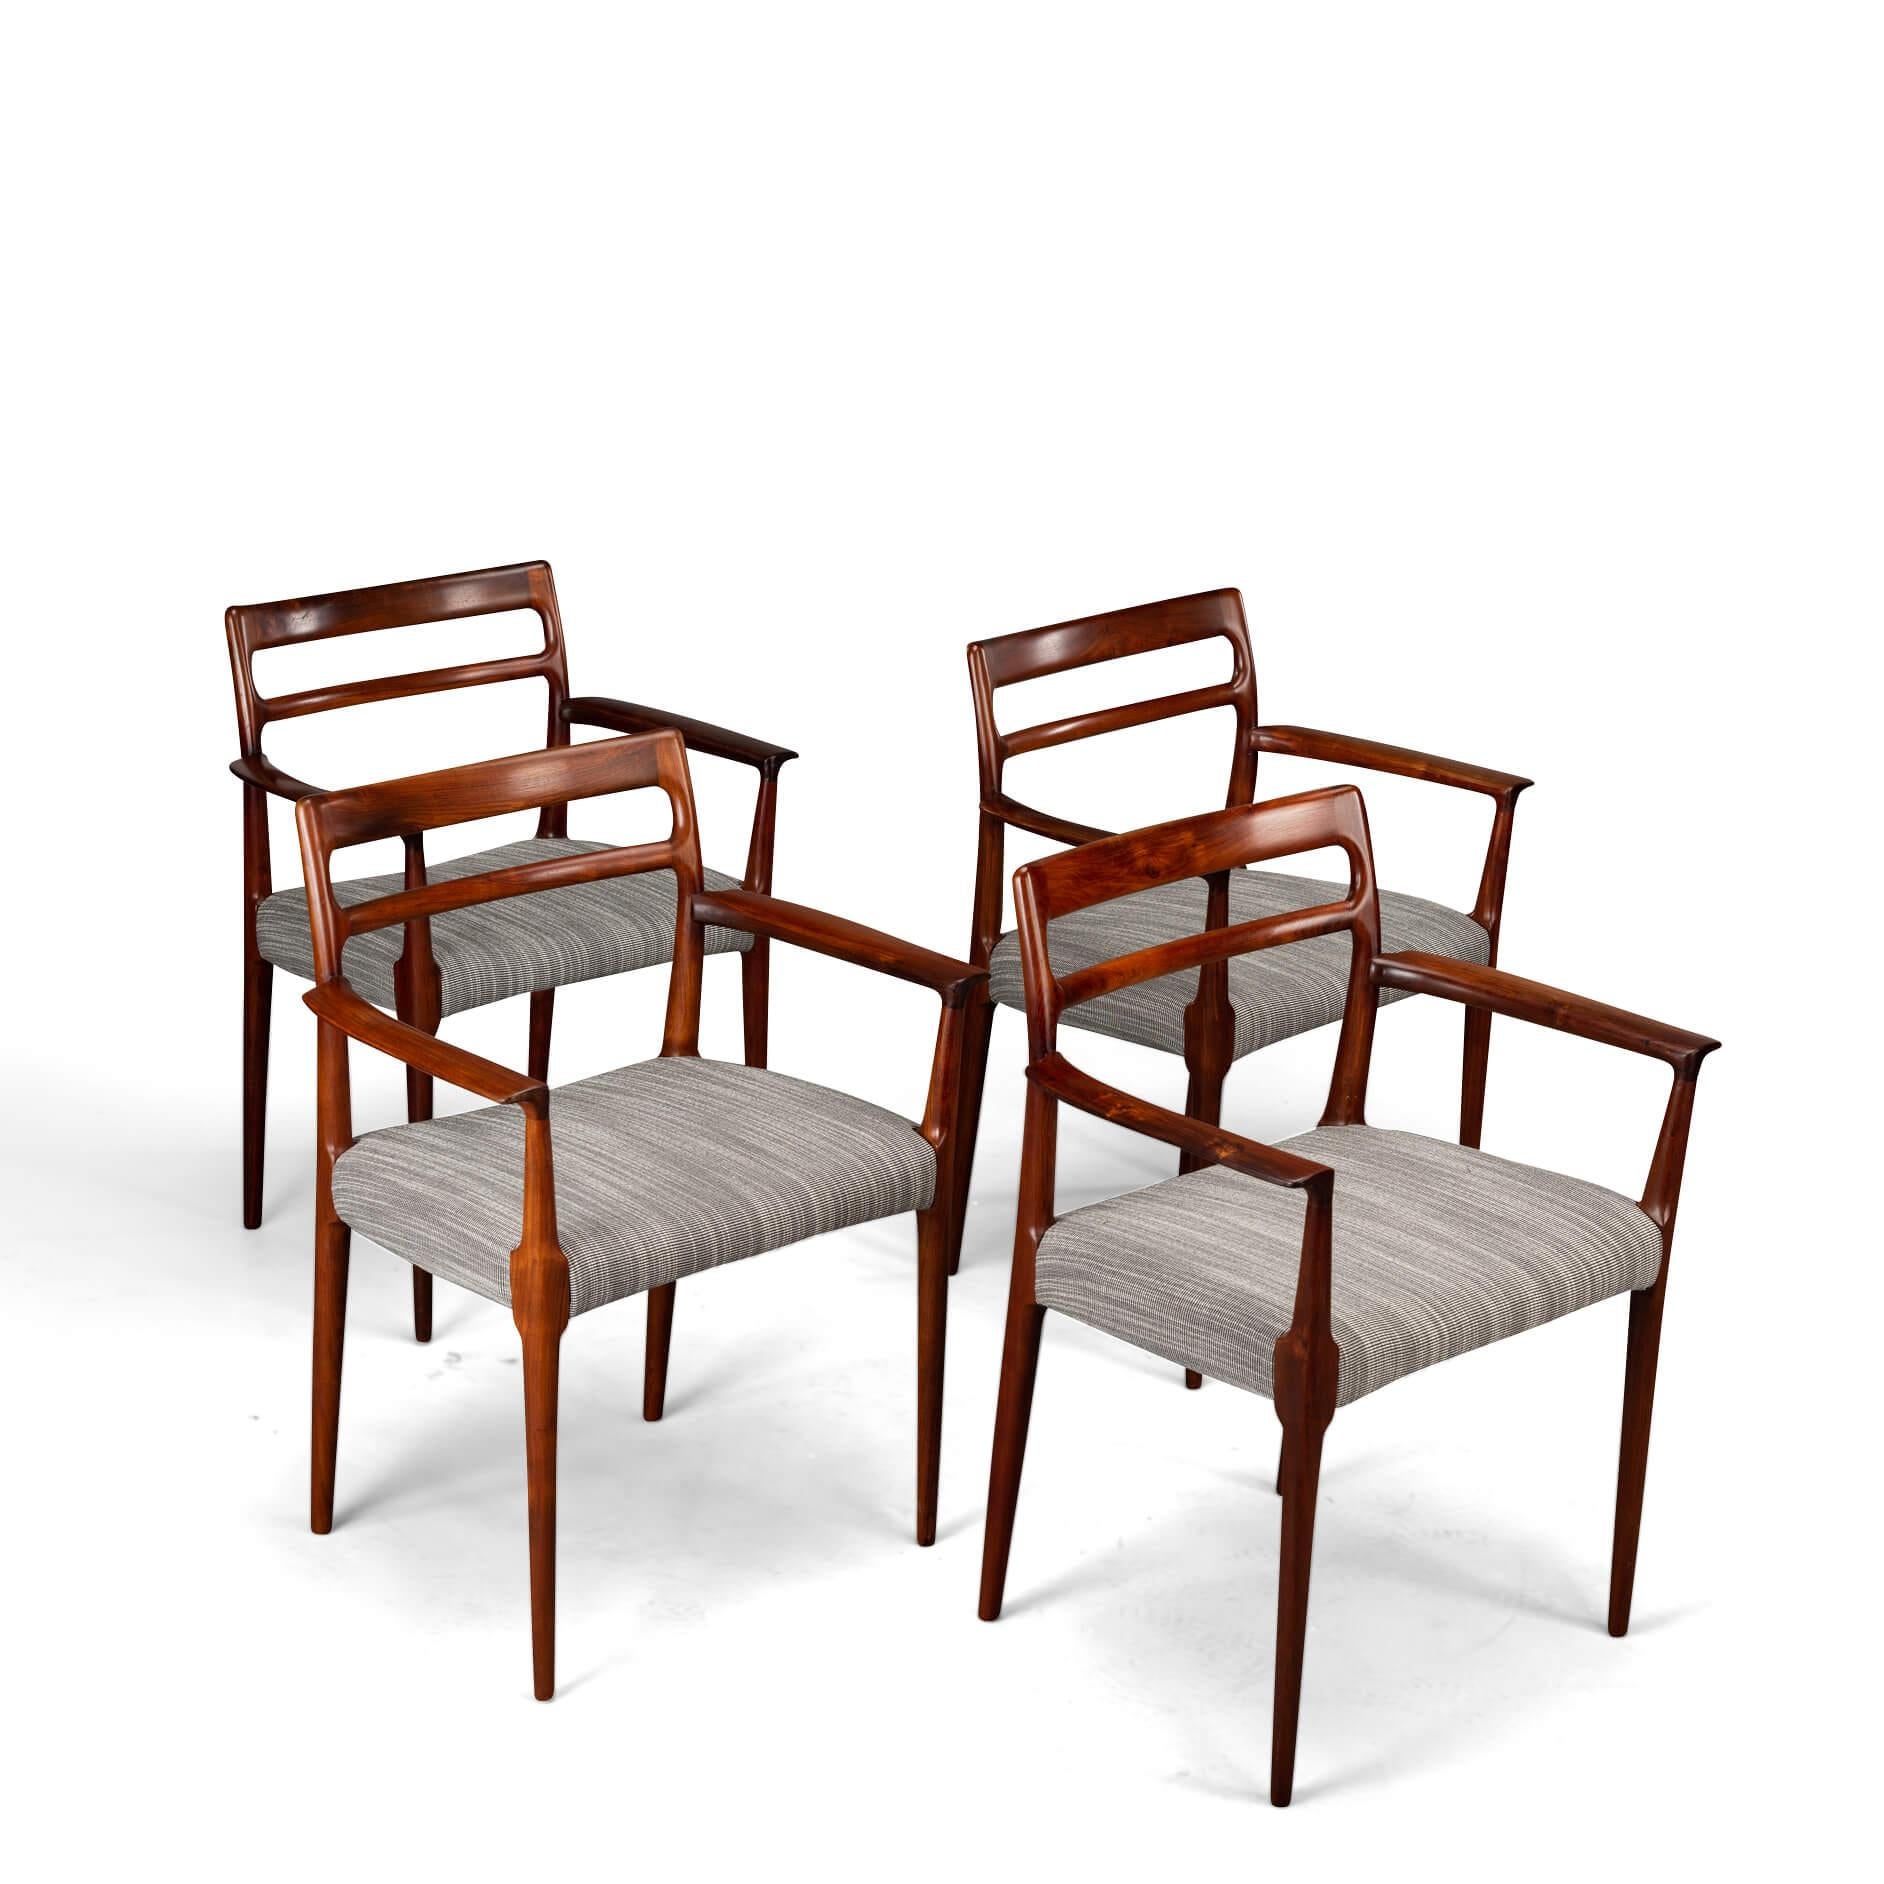 Mid-20th Century Danish Reupholstered Rosewood Armchairs by Erling Torvits for Soro, Set of 4